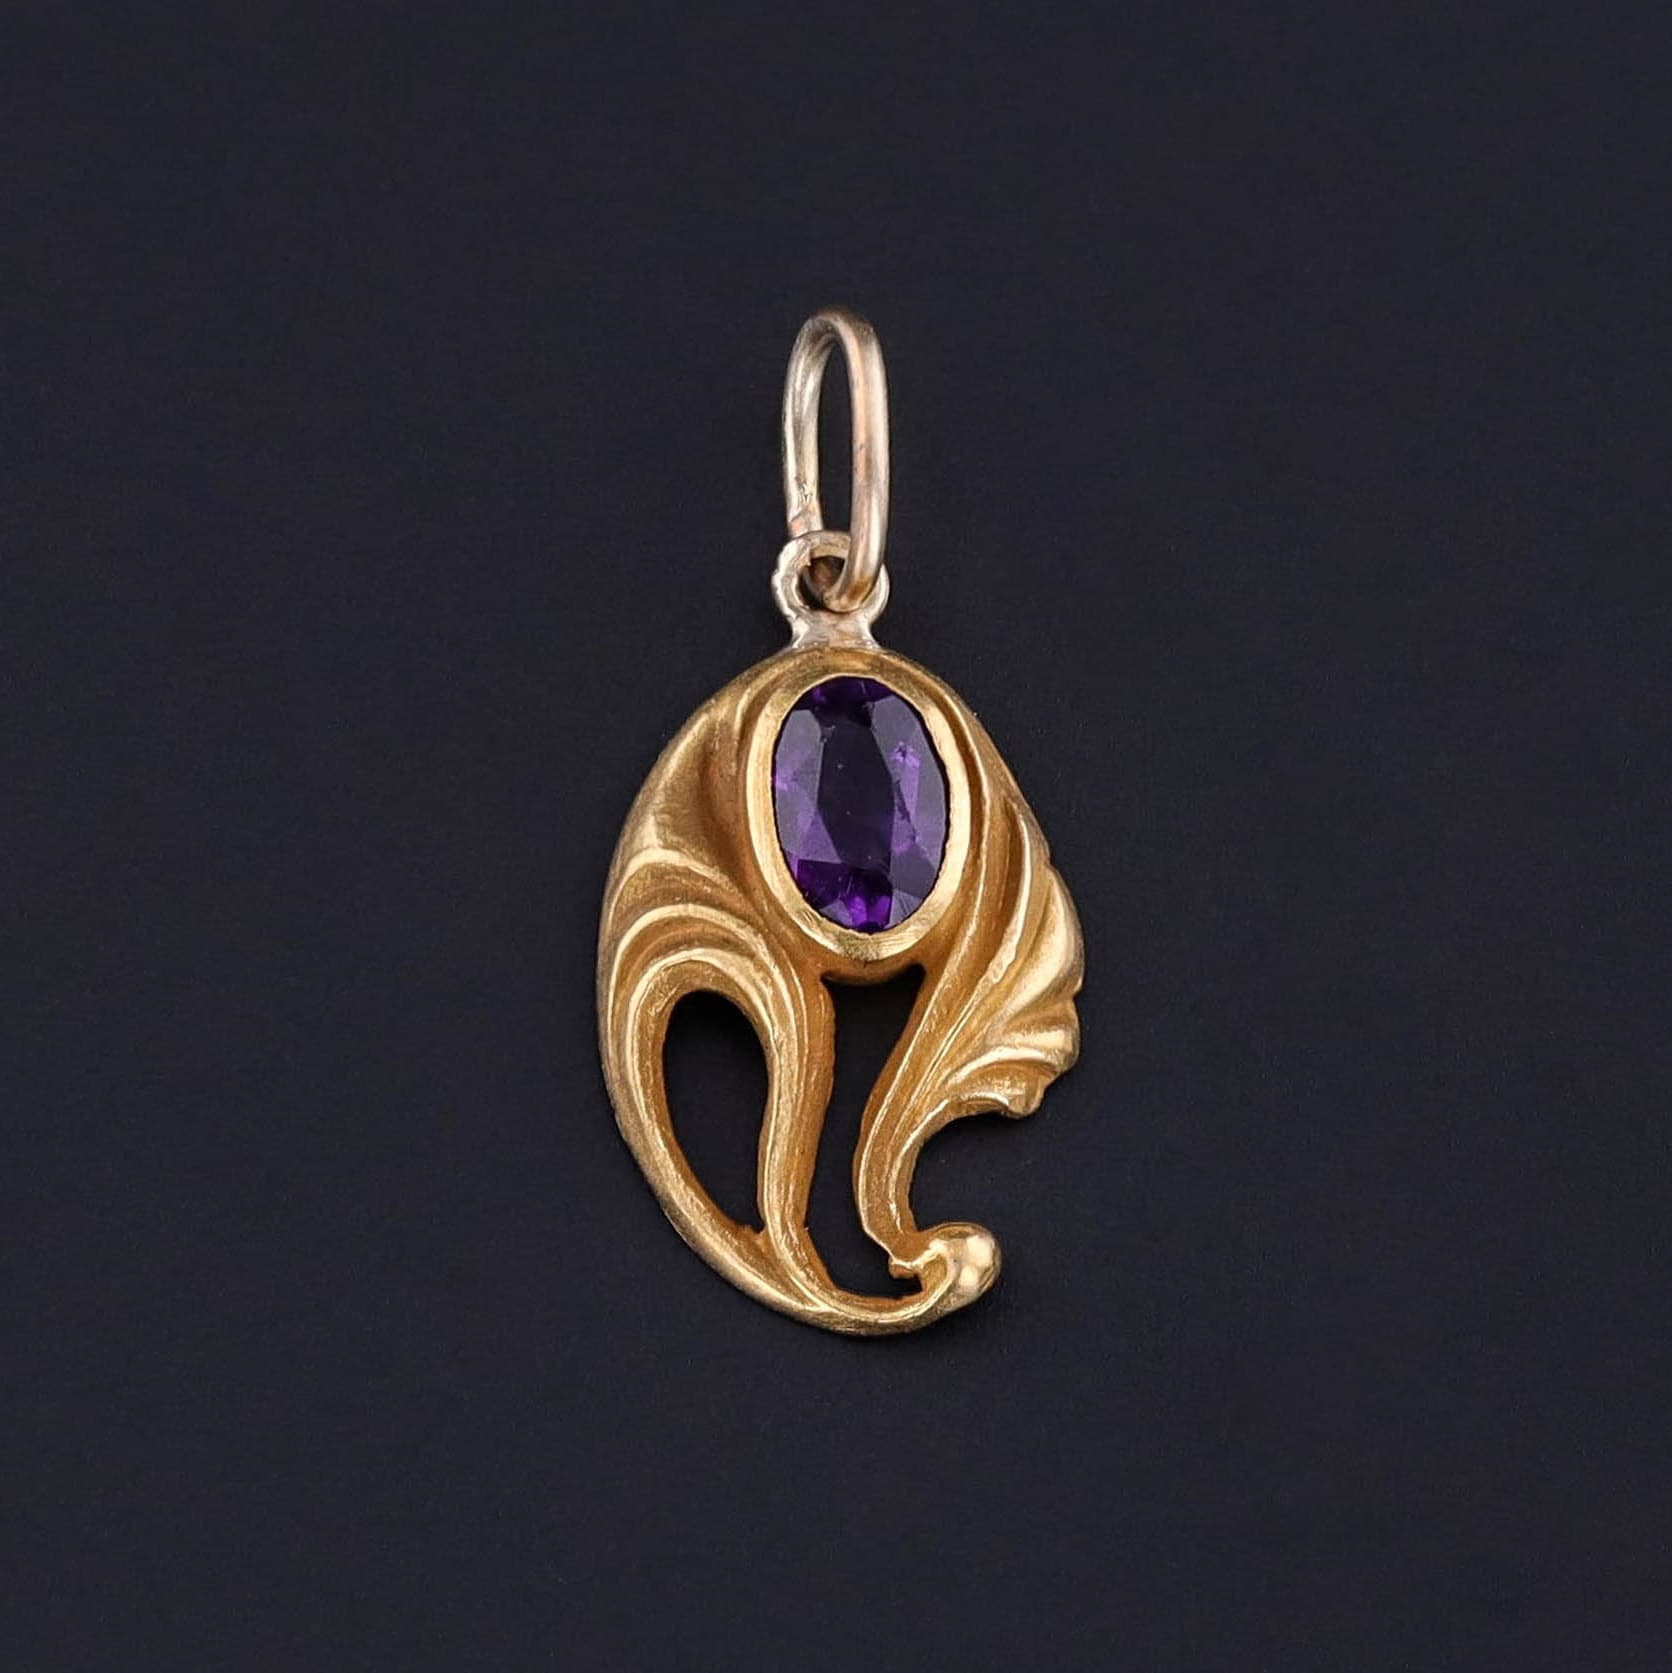 Antique Amethyst Charm of 14k Gold